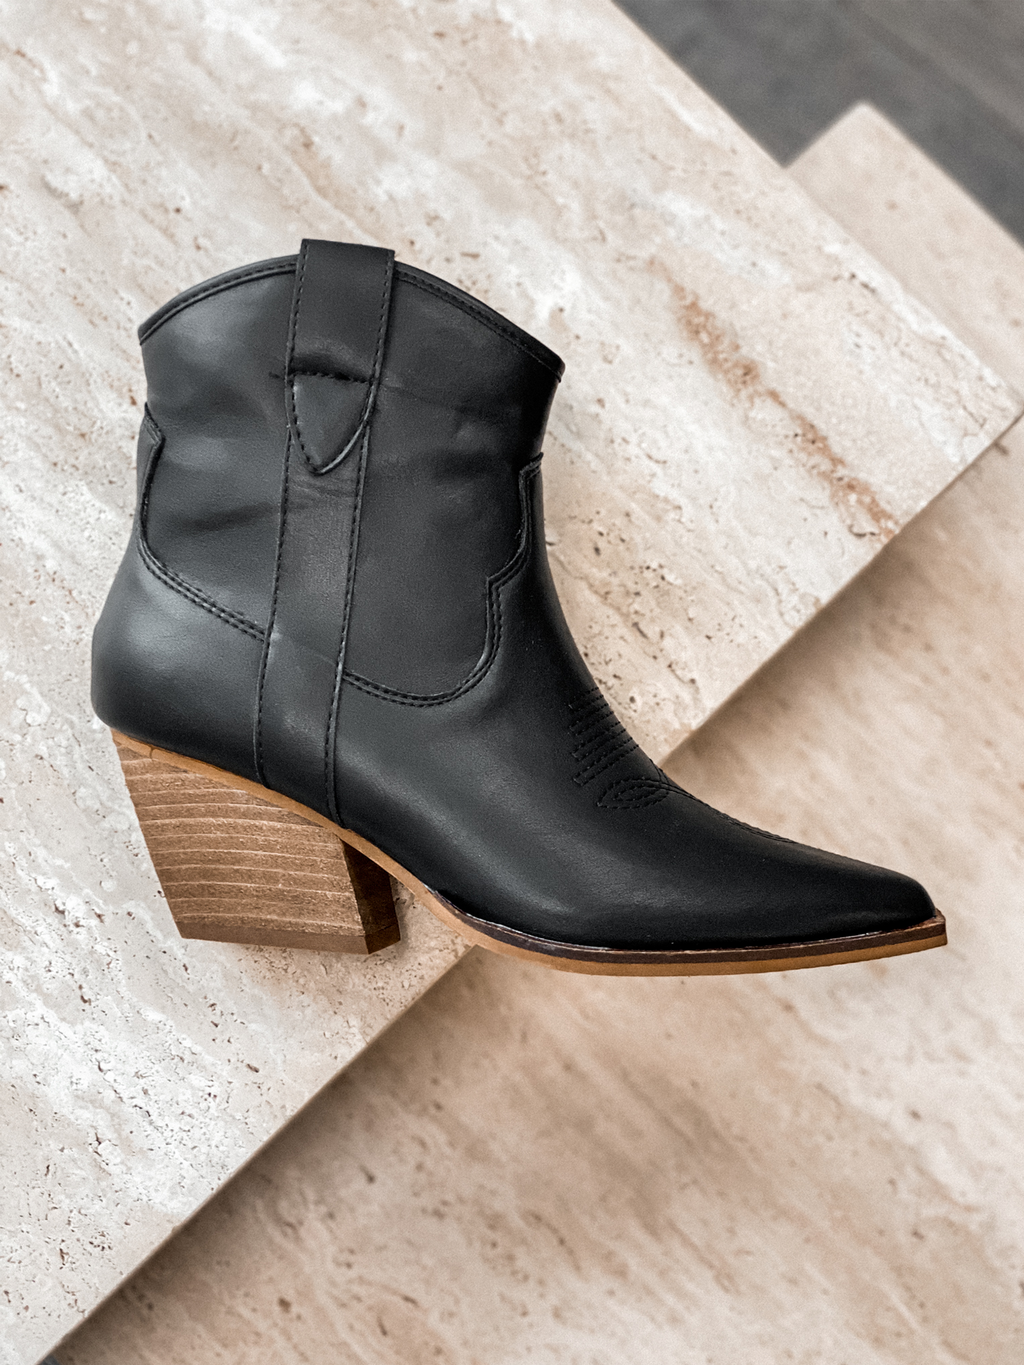 Darian Bootie in Black - Final Sale - Stitch And Feather